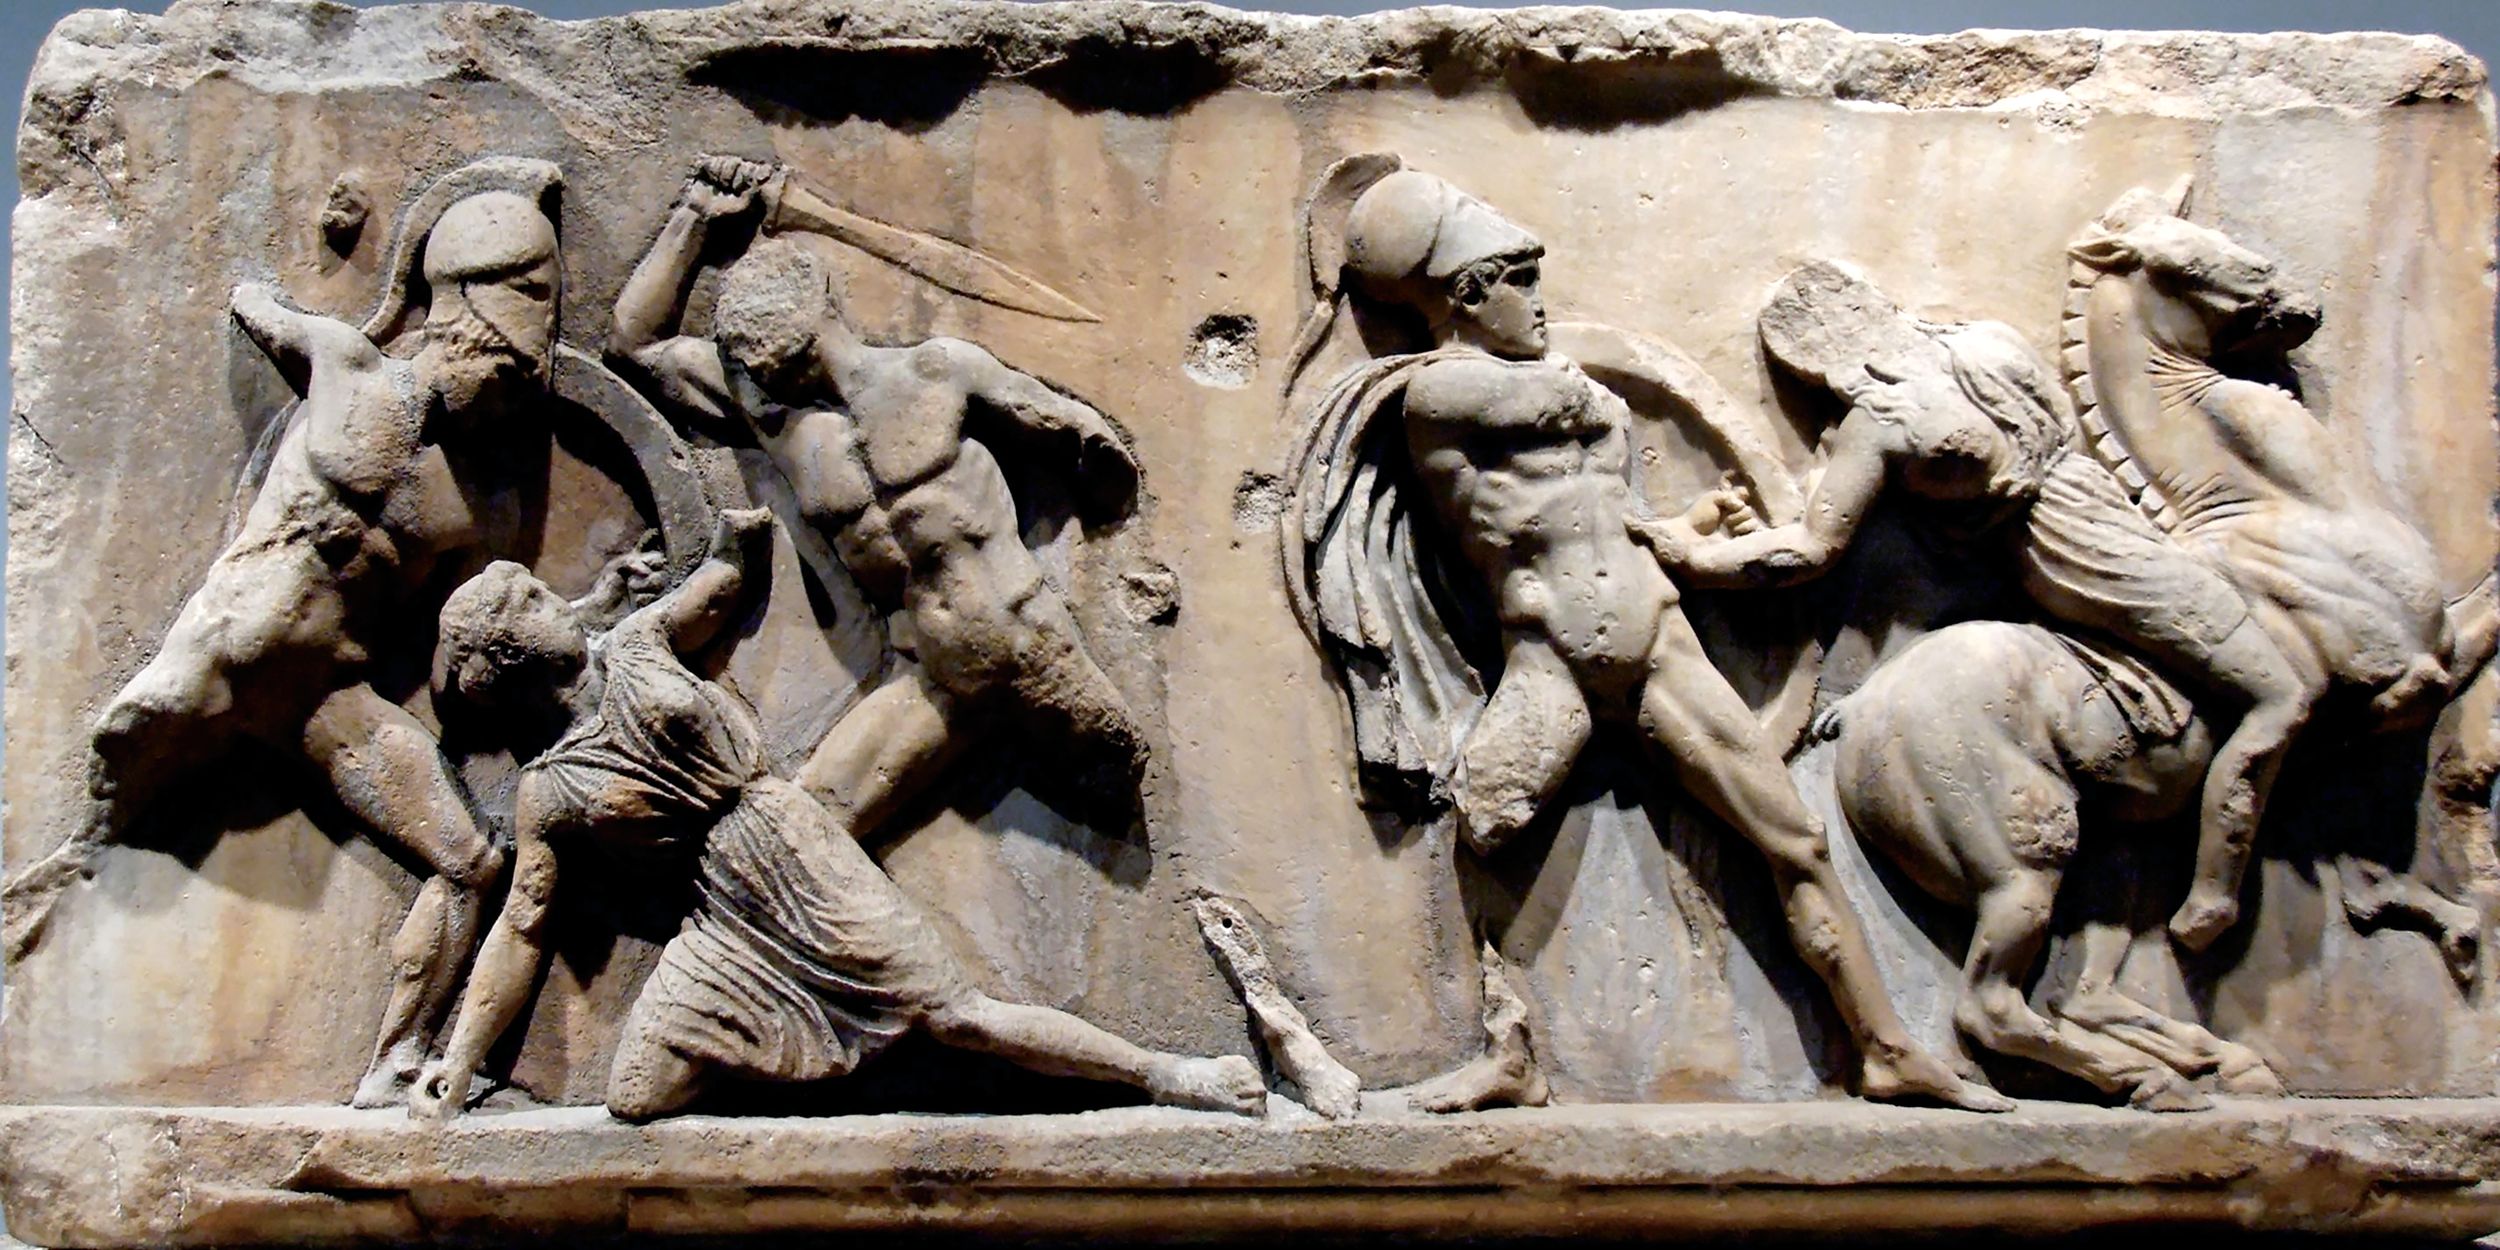 This slab of the Amazonomachy frieze from the Mausoleum at Halikarnassos, now in the British Museum, depicts Greek warriors battling Amazons.